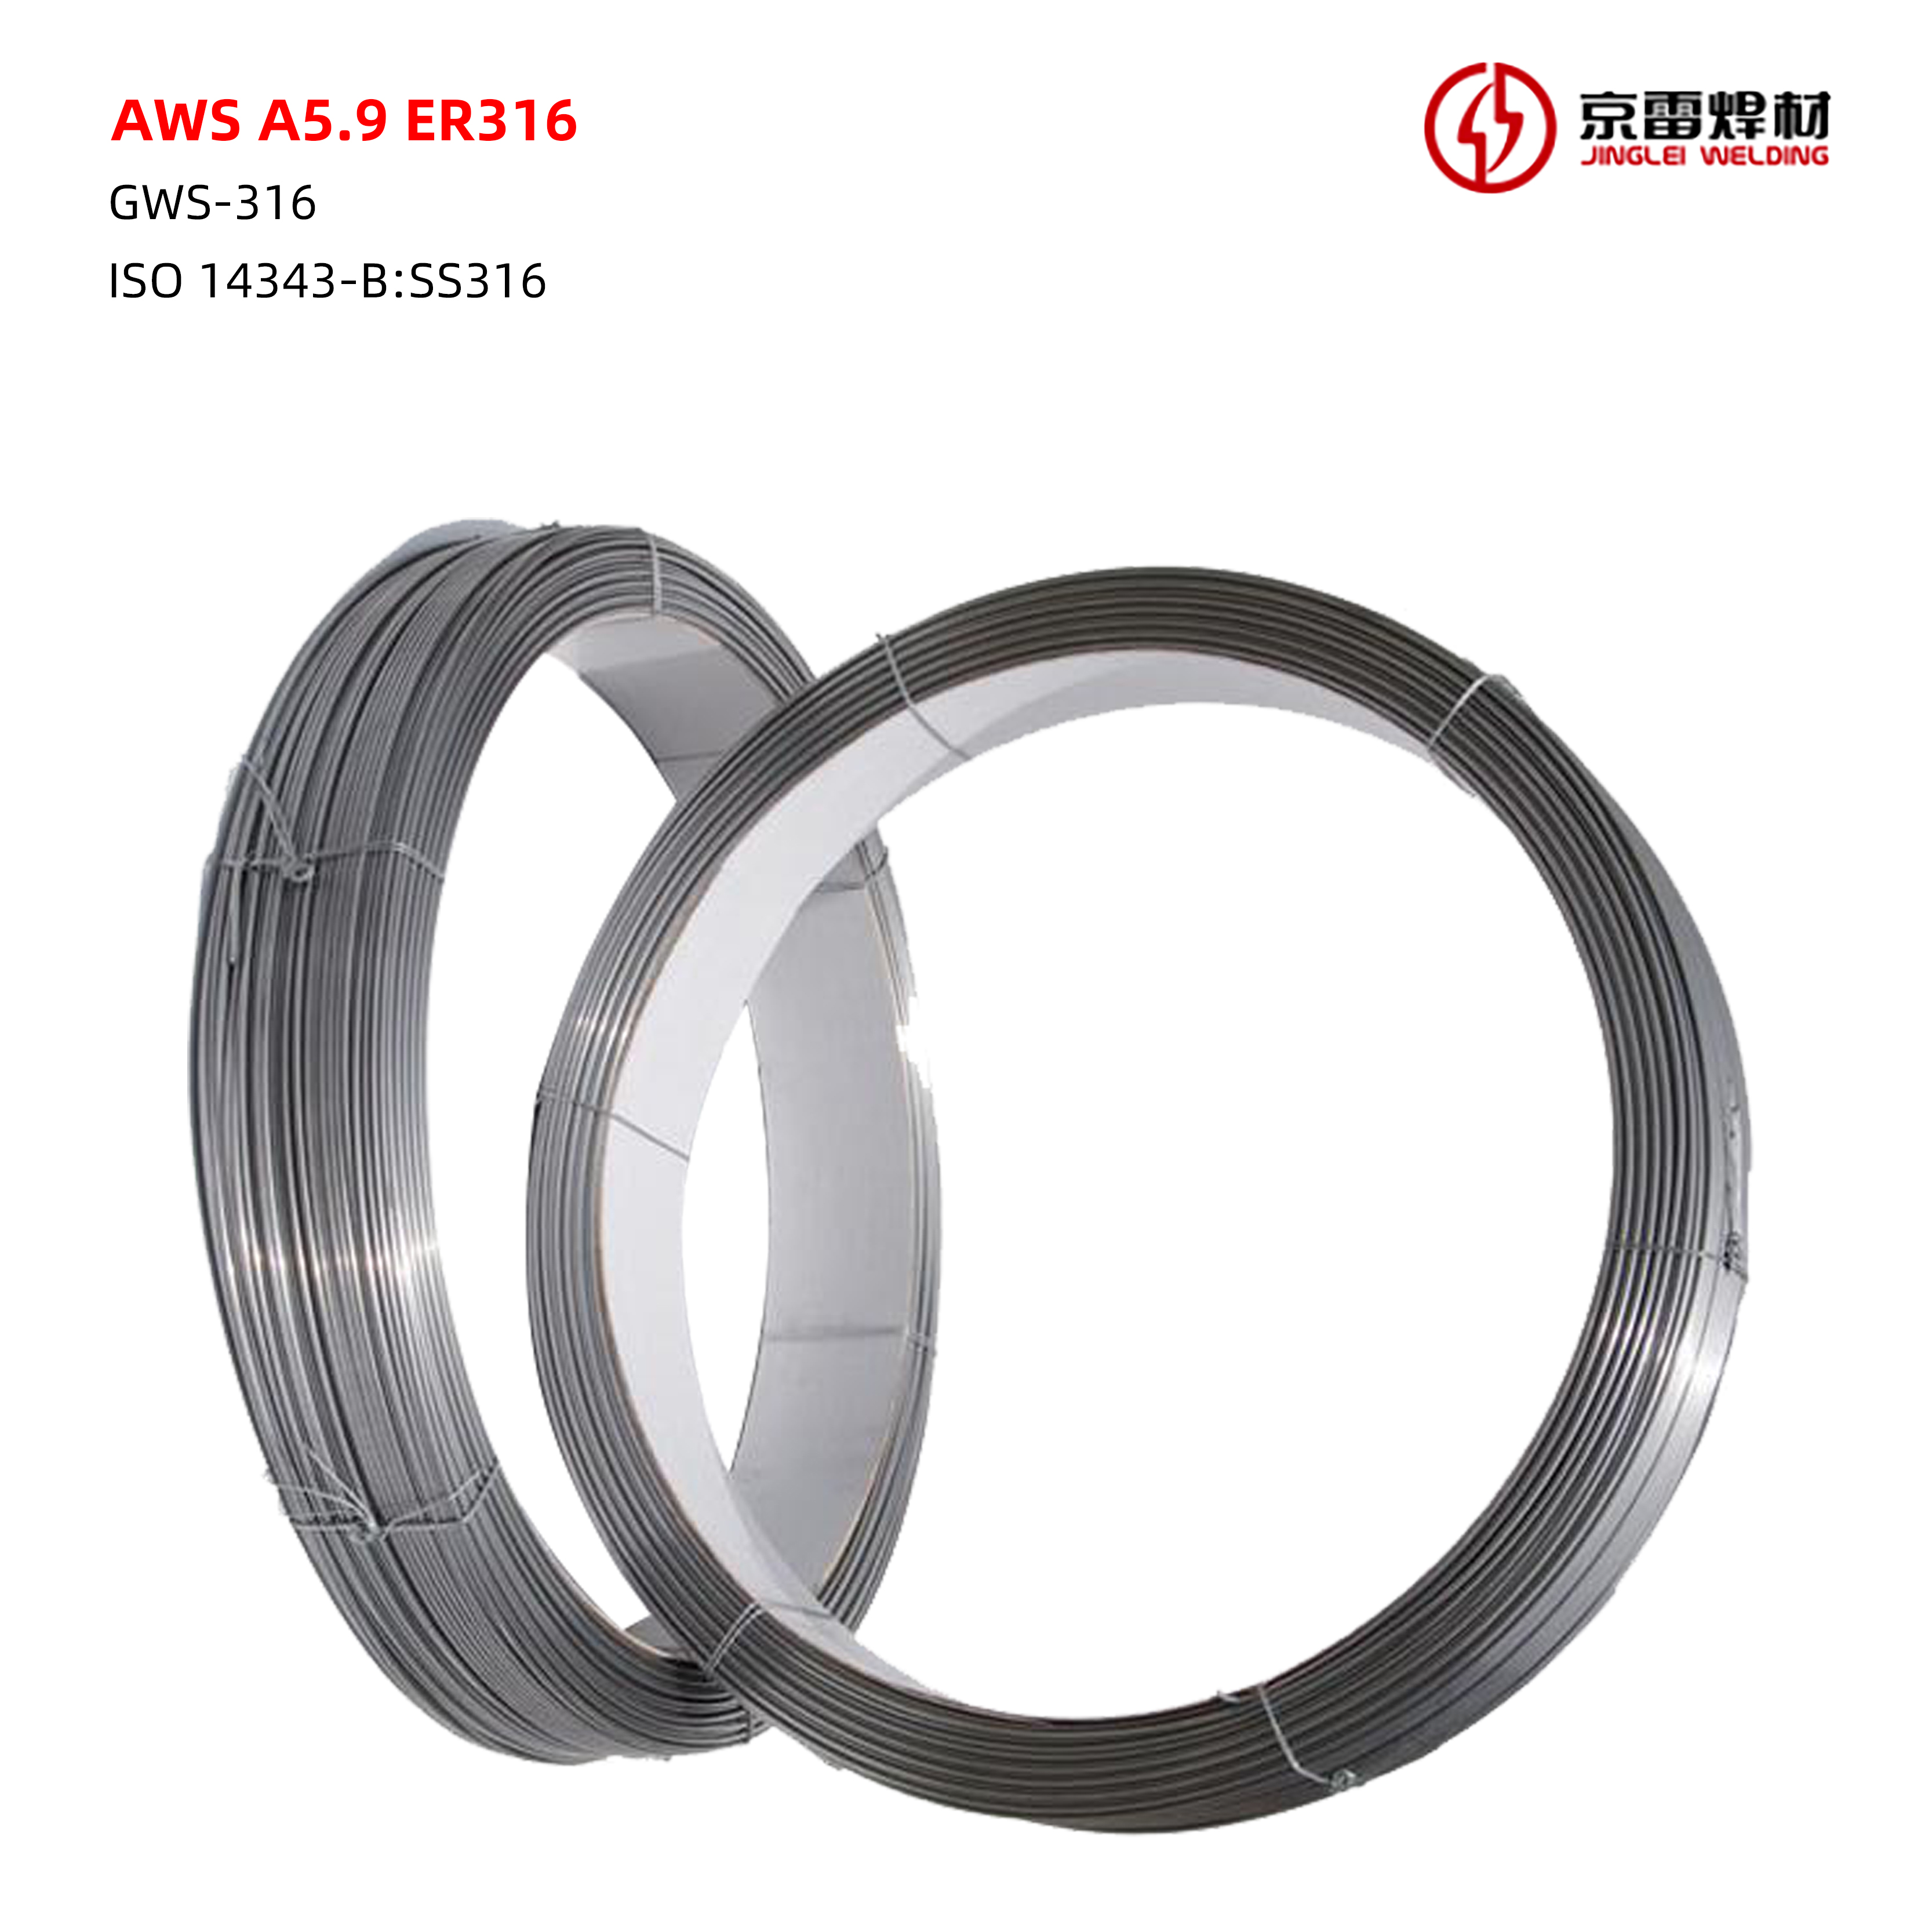 Stainless steels SAW welding wire ER316 and flux Welding connection